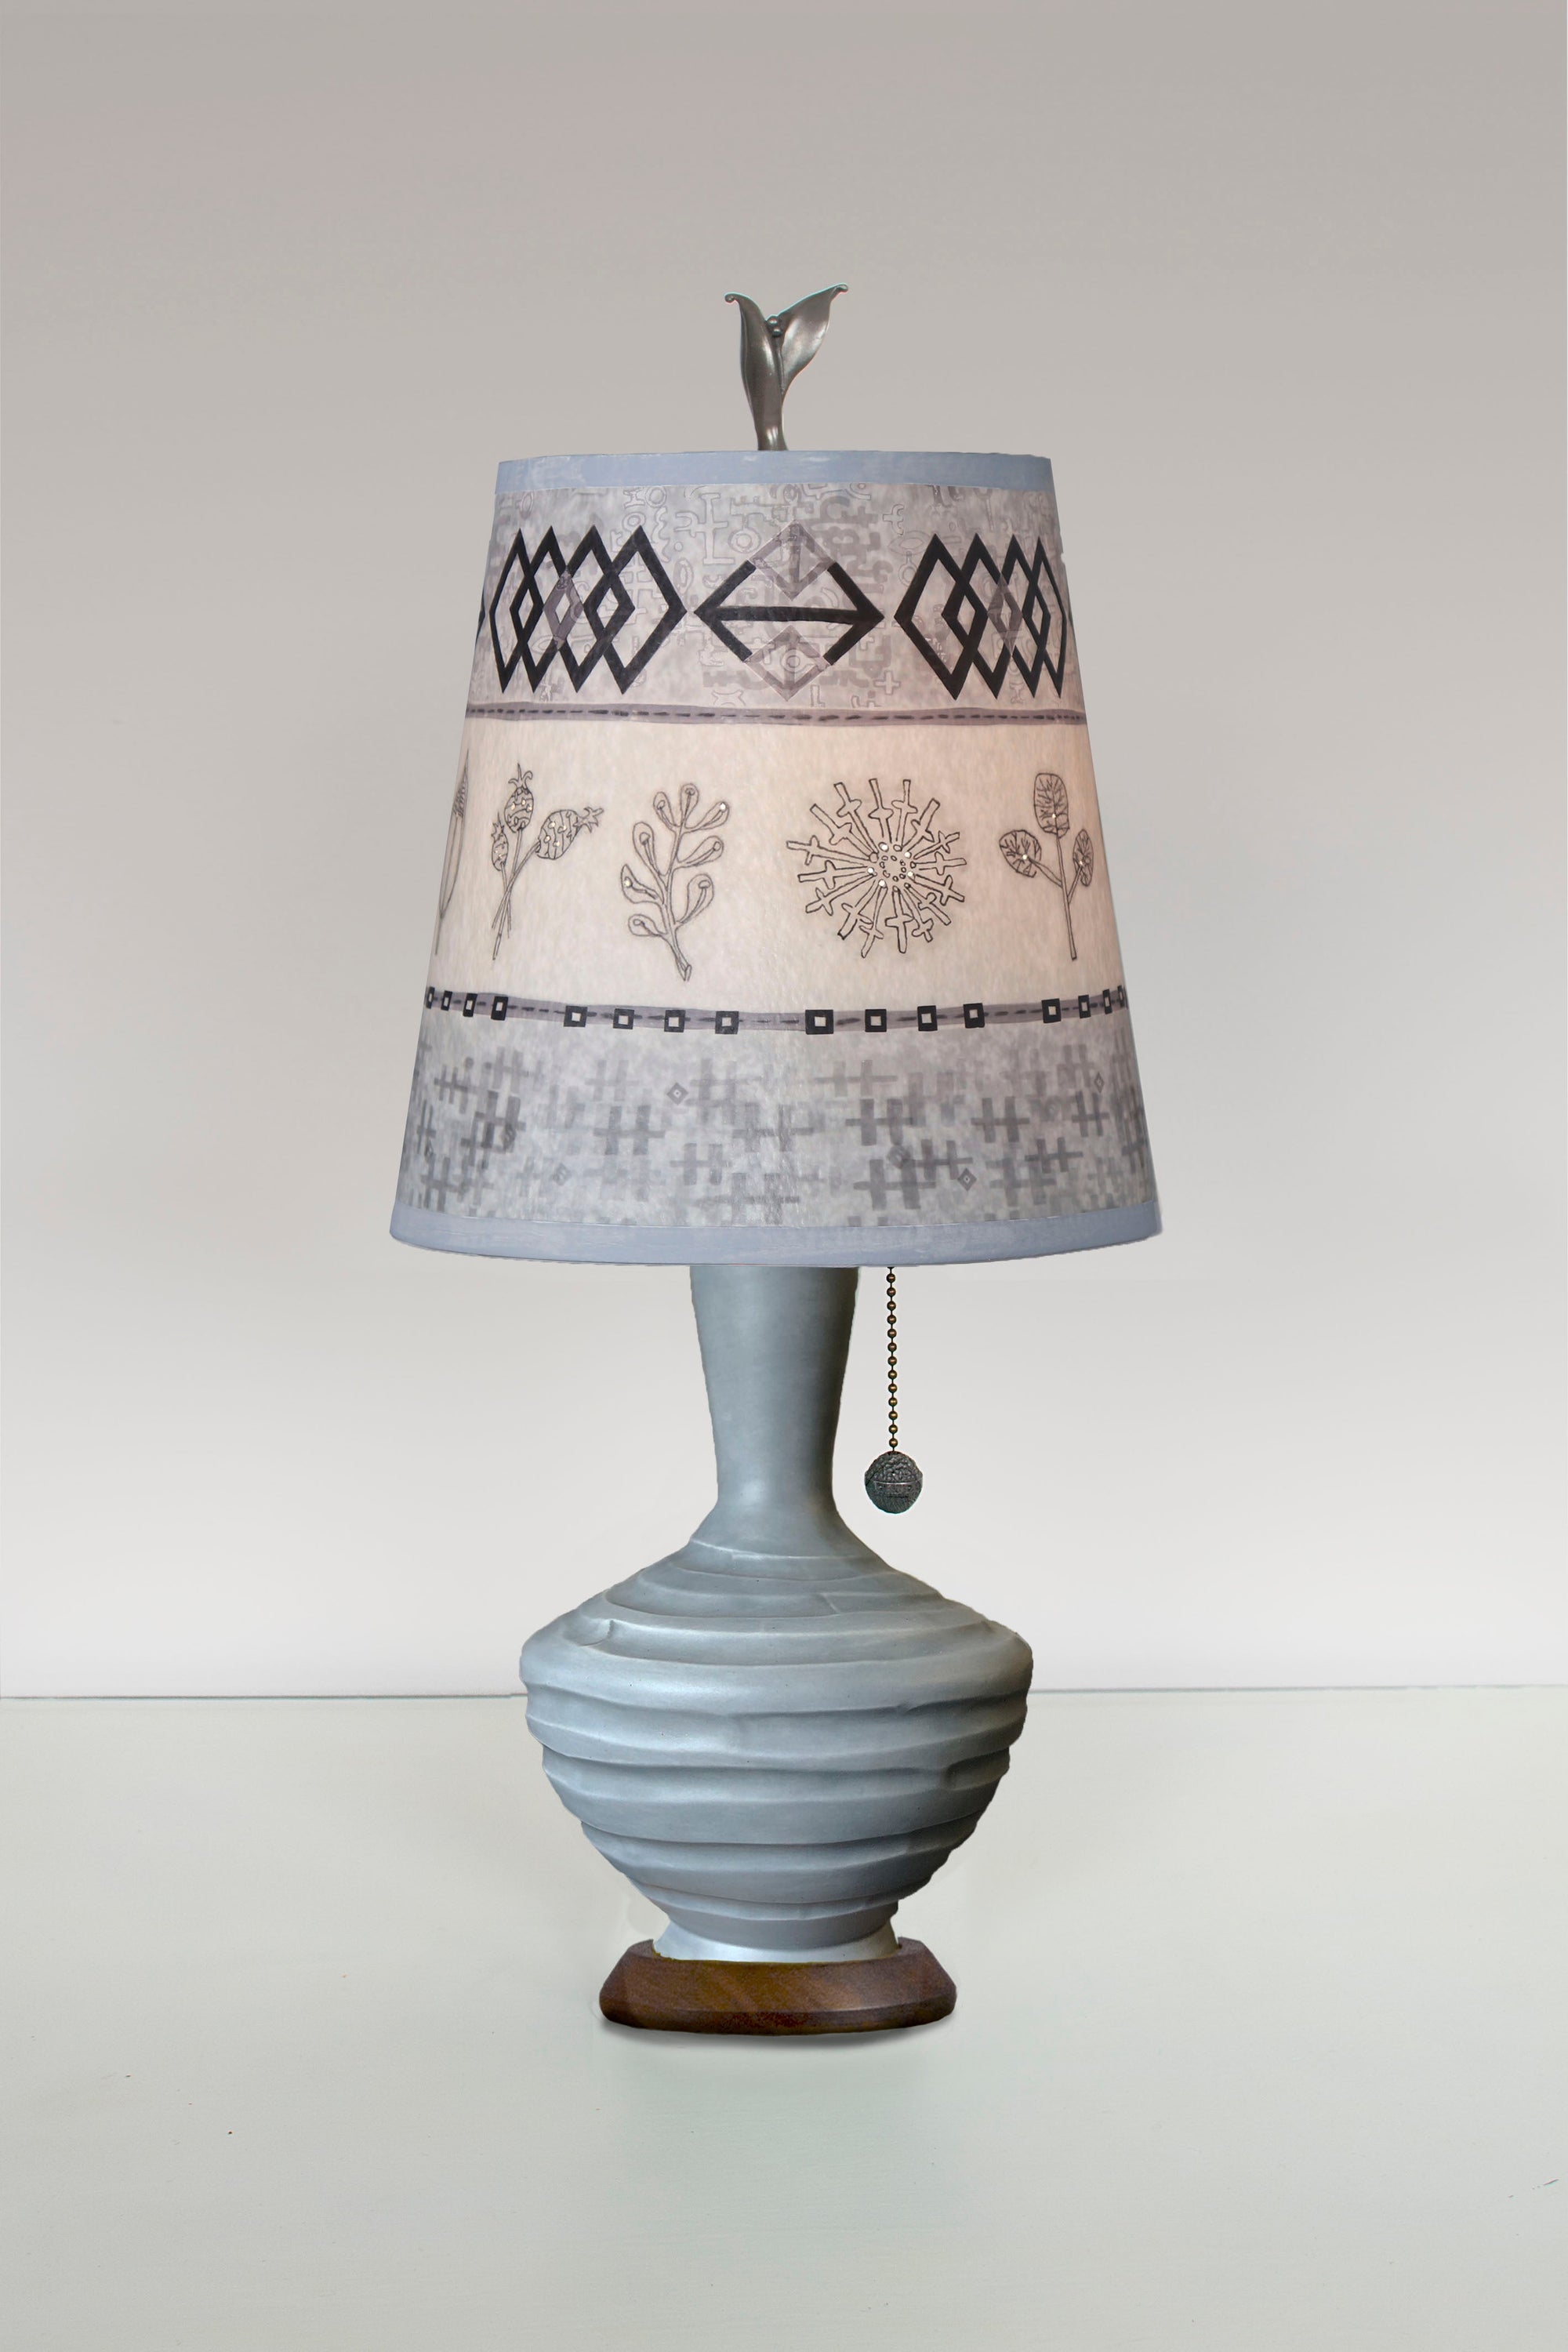 Janna Ugone & Co Table Lamps Ceramic Table Lamp with Small Drum Shade in Woven & Sprig in Mist